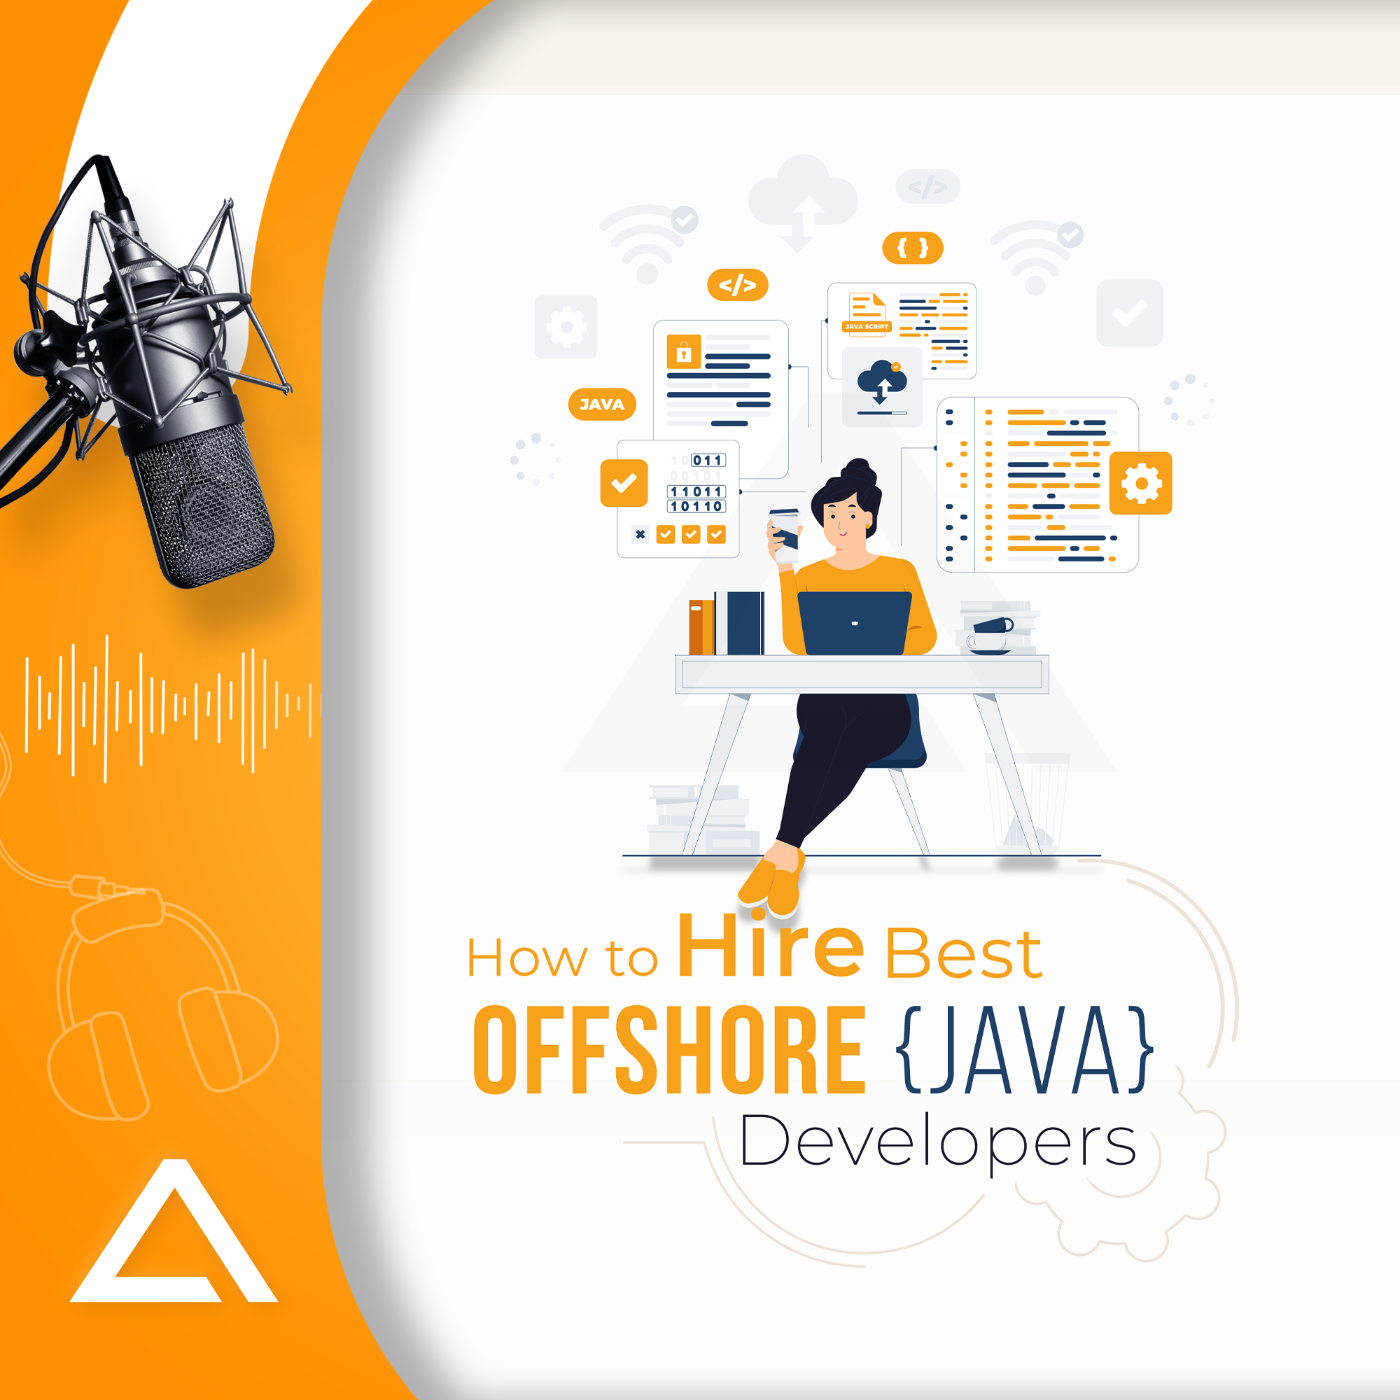 Guide to Find and Hire Offshore Java Developers: podcast